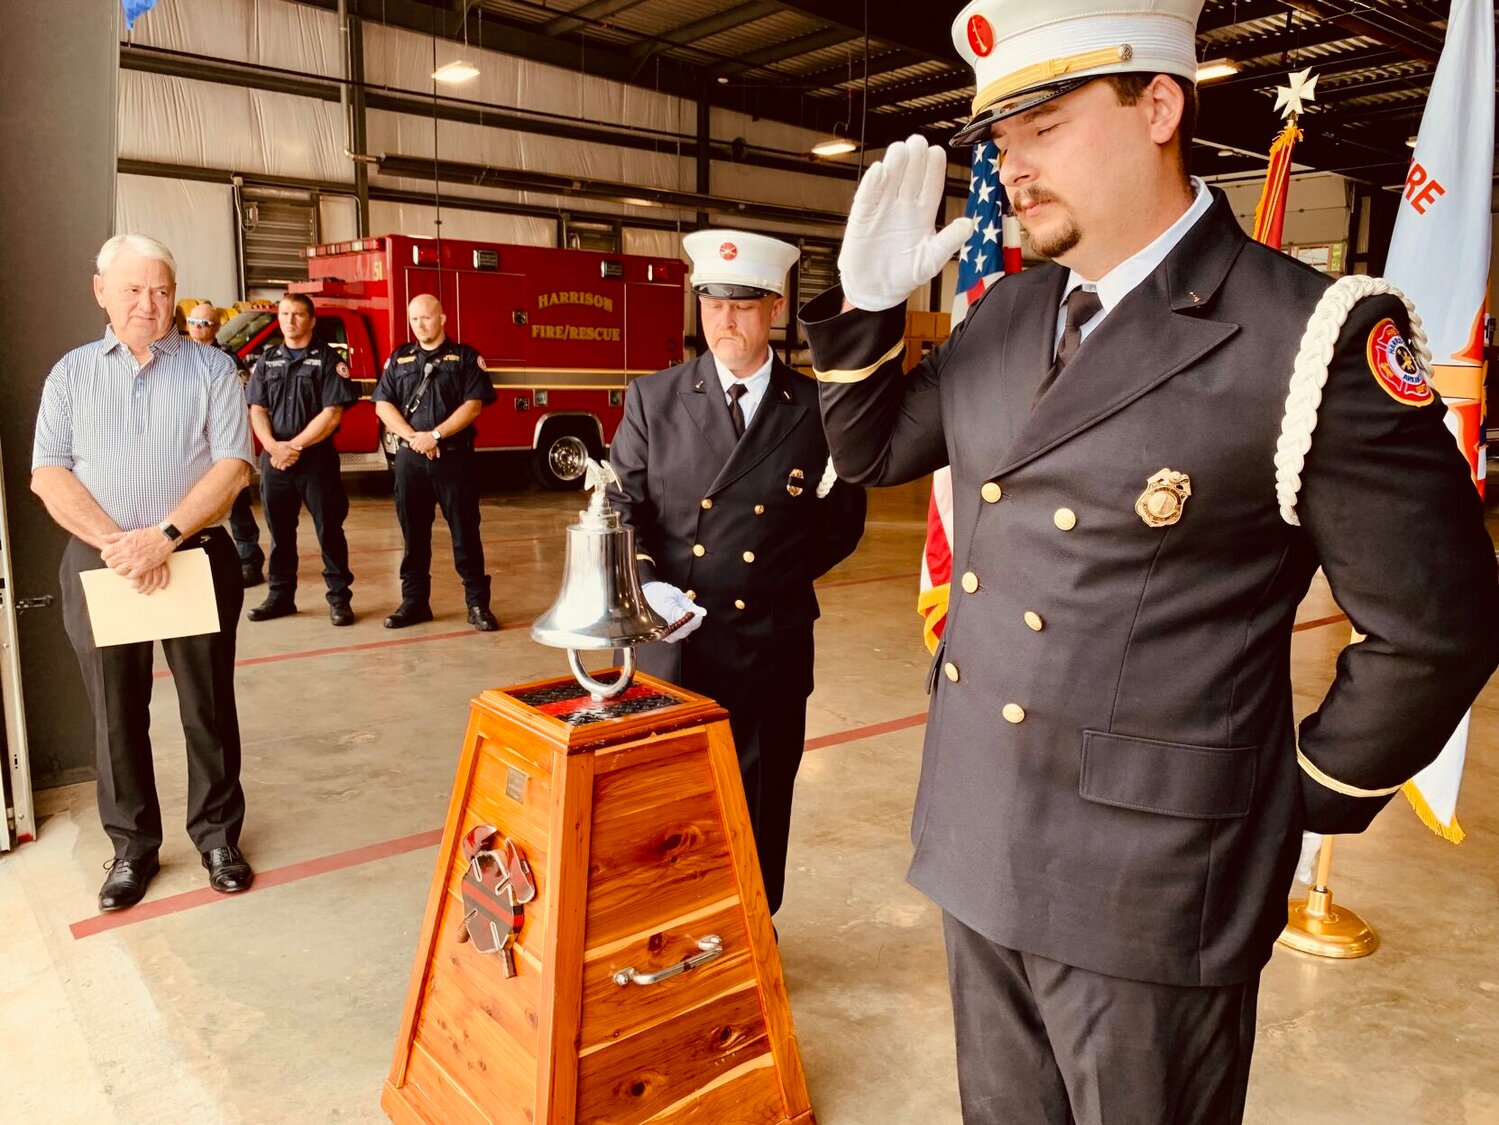 Harrison Fire Department Honor Guard member including Lt. Lindsey Harp (right) salute as Lt. Seth Estes rings the bell during the 9/11 Ceremony held Monday at the Central Fire Station at the Harrison City Hall on Industrial Park Road. At left is Harrison Mayor Jerry Jackson. CONTRIBUTED PHOTO/LEE H. DUNLAP